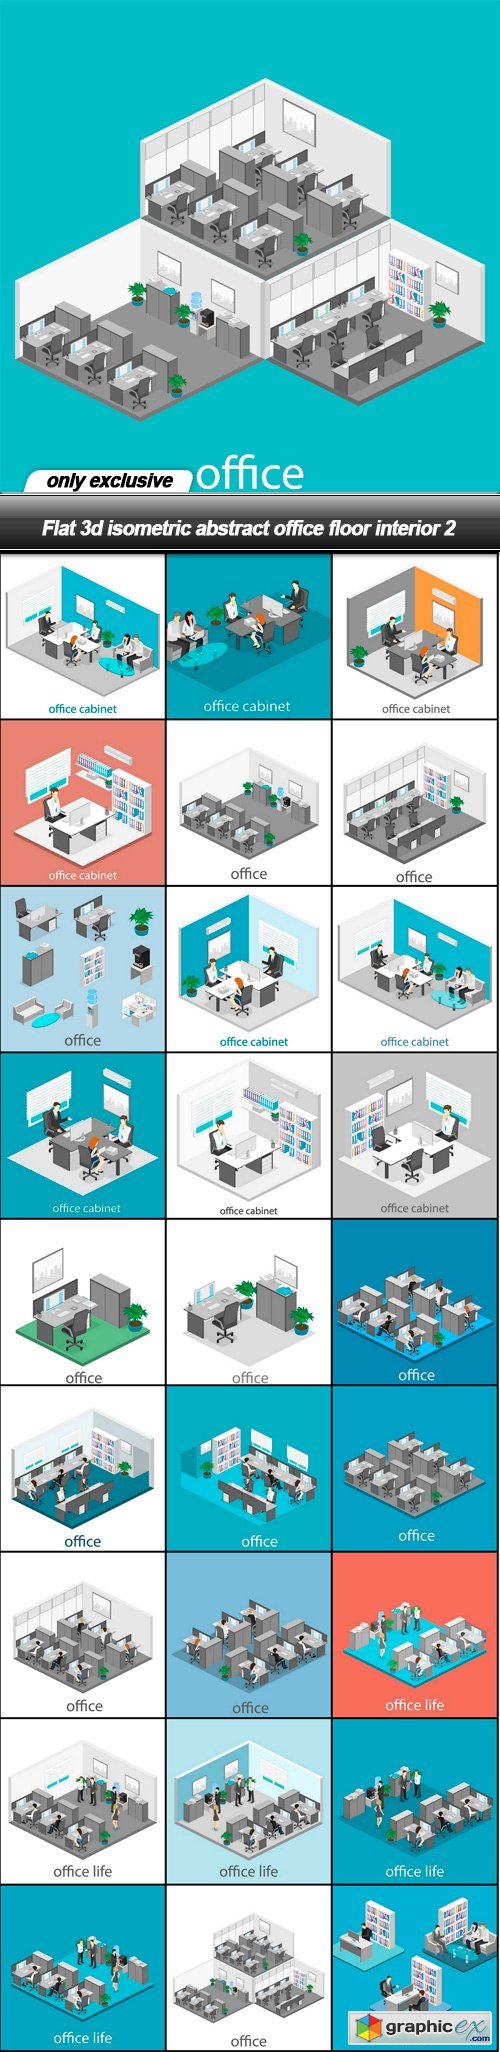 Flat 3d isometric abstract office floor interior 2 - 28 EPS